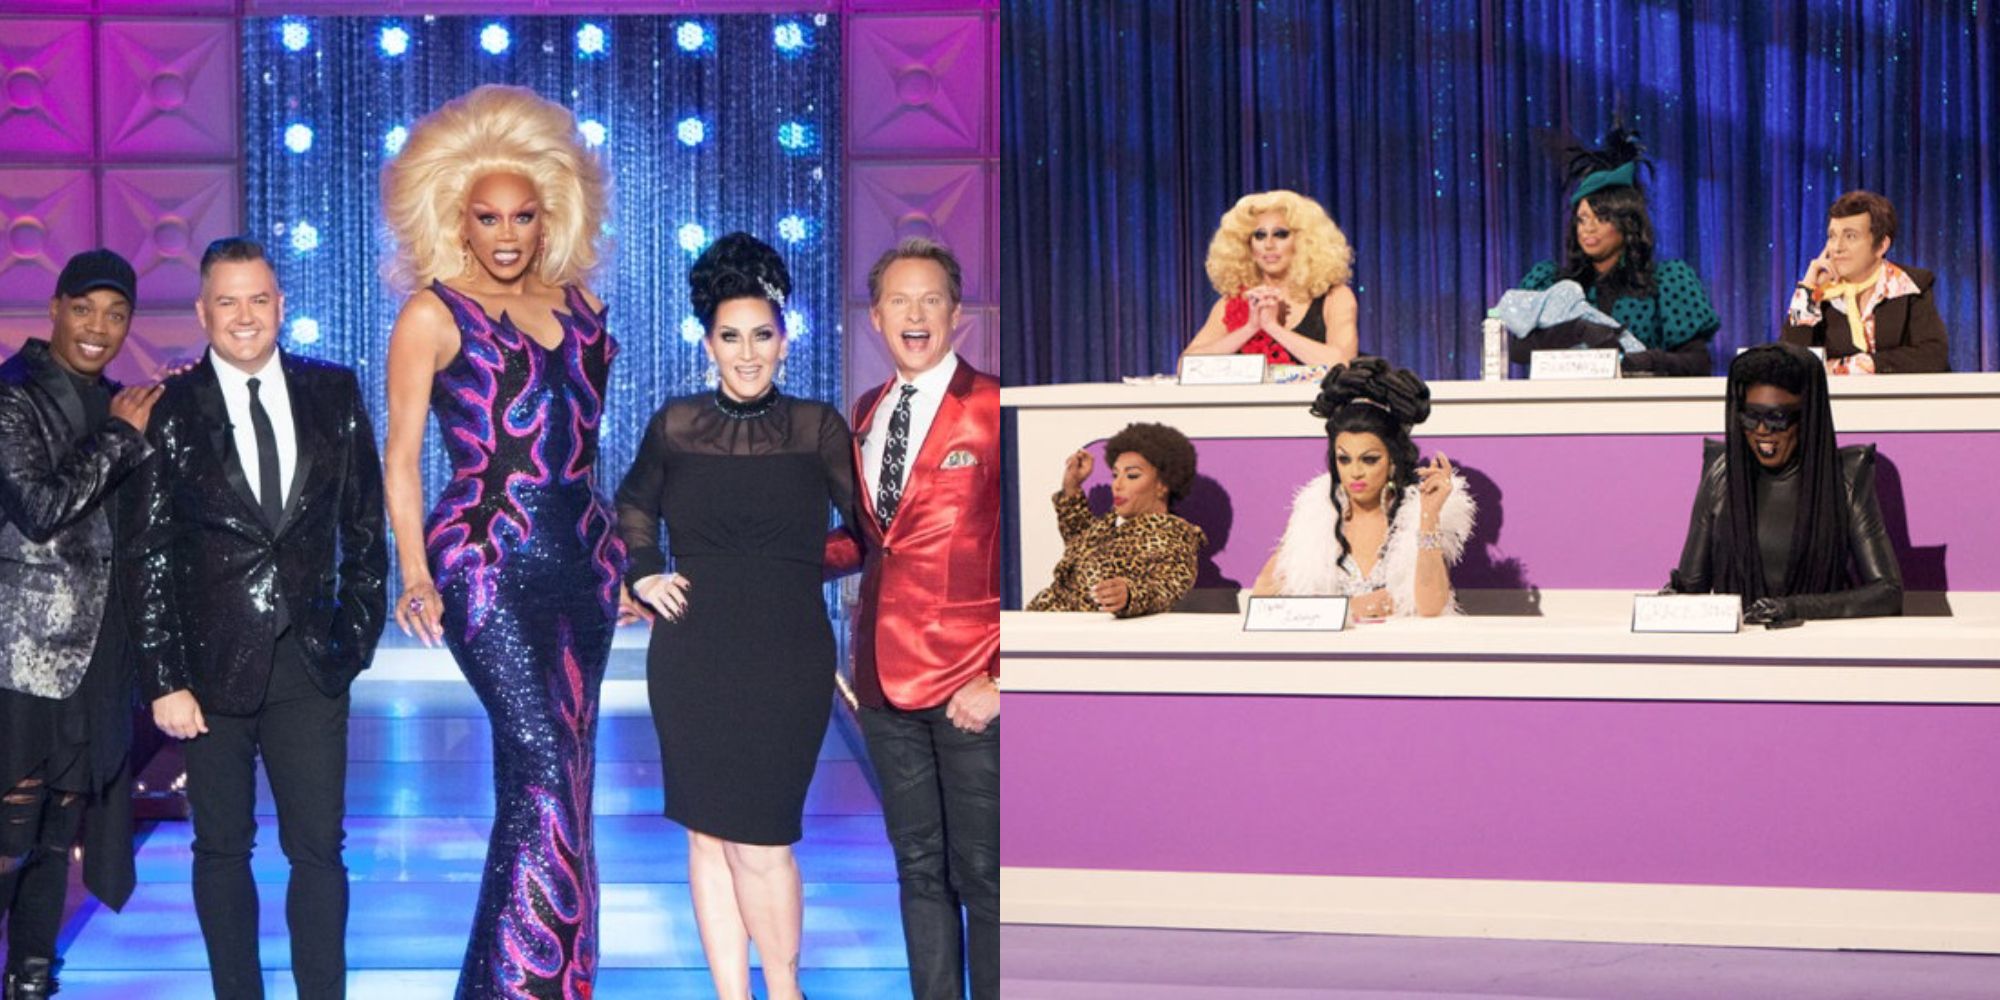 Split image showing the RuPaul's Drag Race's judges and an edition of Snatch Game